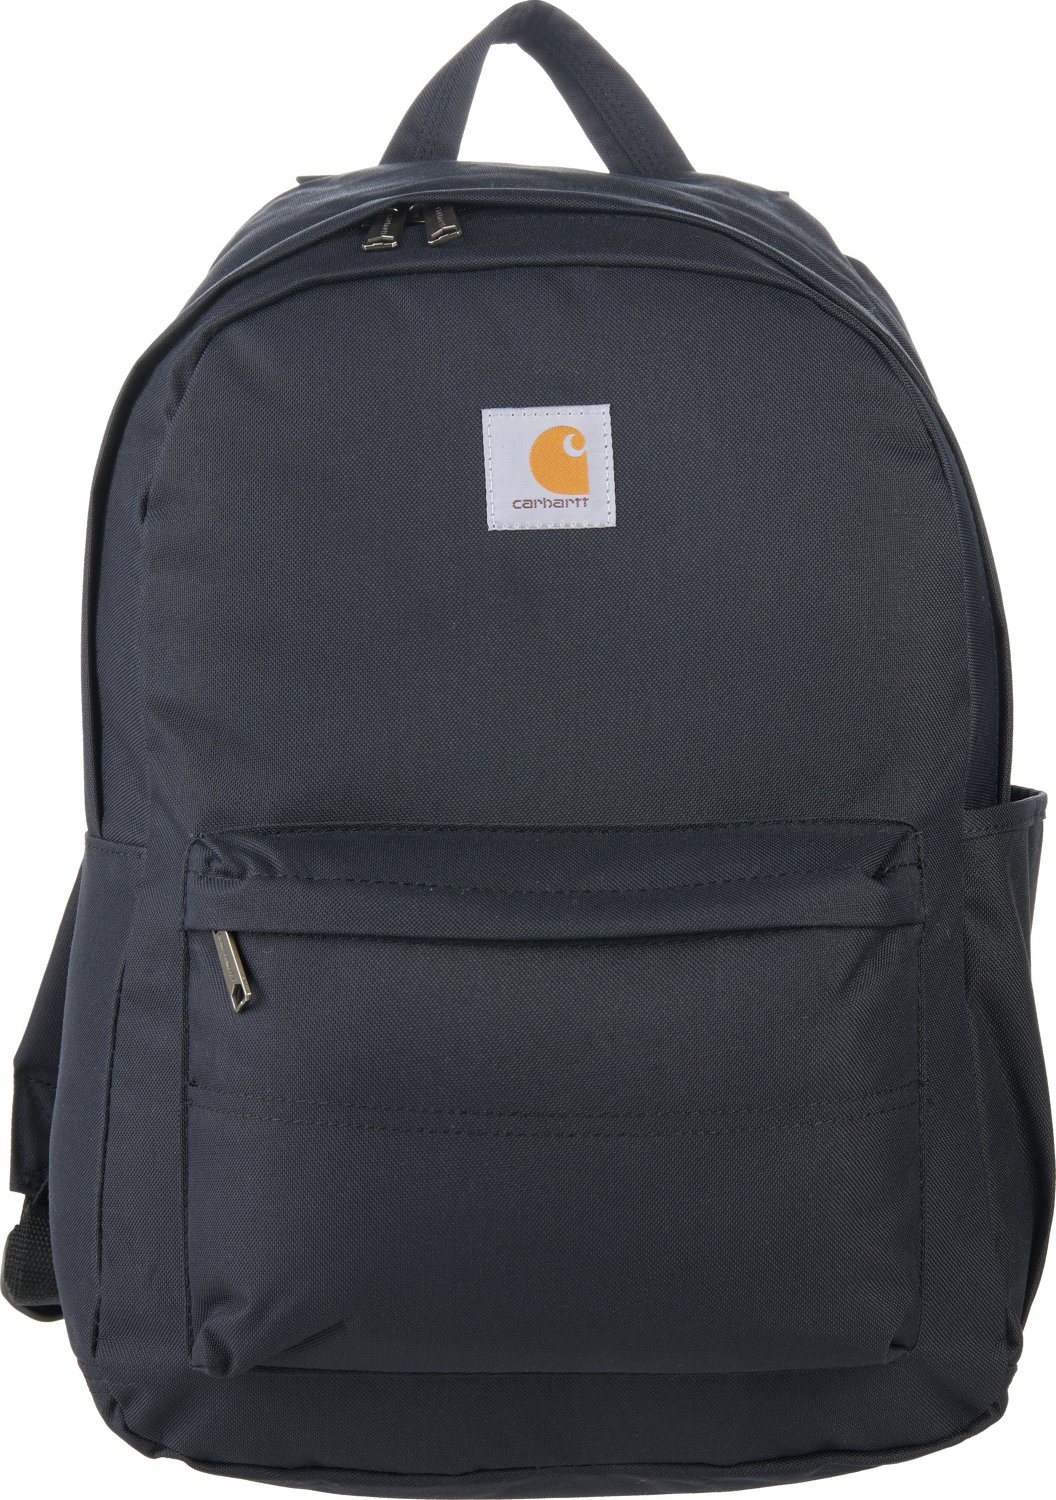 Carhartt Classic 21L Laptop Daypack                                                                                              - view number 1 selected